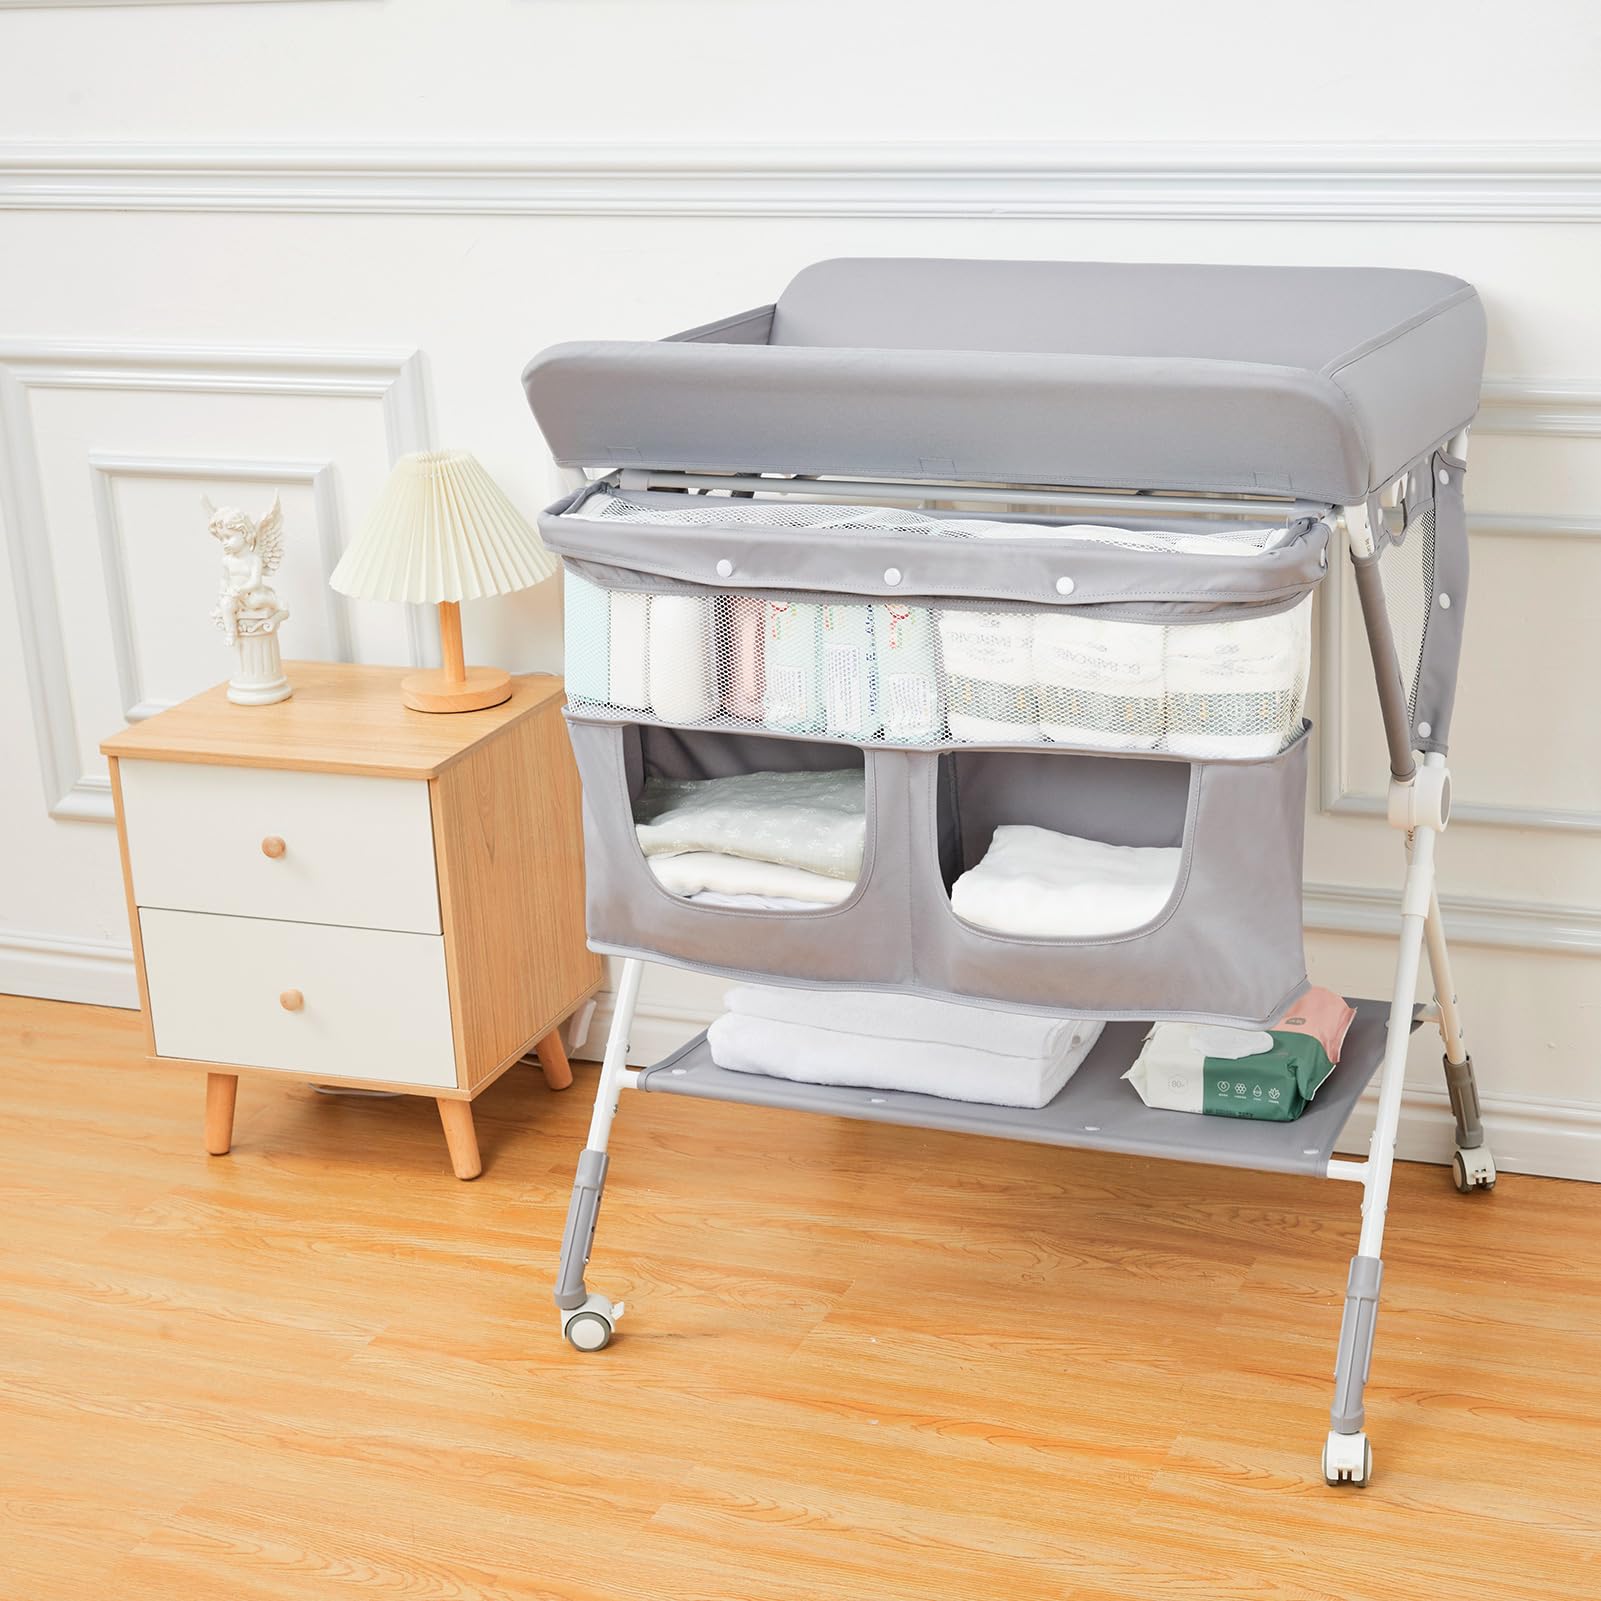 Portable Baby Changing Table, Babevy Foldable Diaper Change Table with Wheels, Adjustable Height, Cleaning Bucket, Changing Station for Infant Mobile Nursery Organizer for Newborn